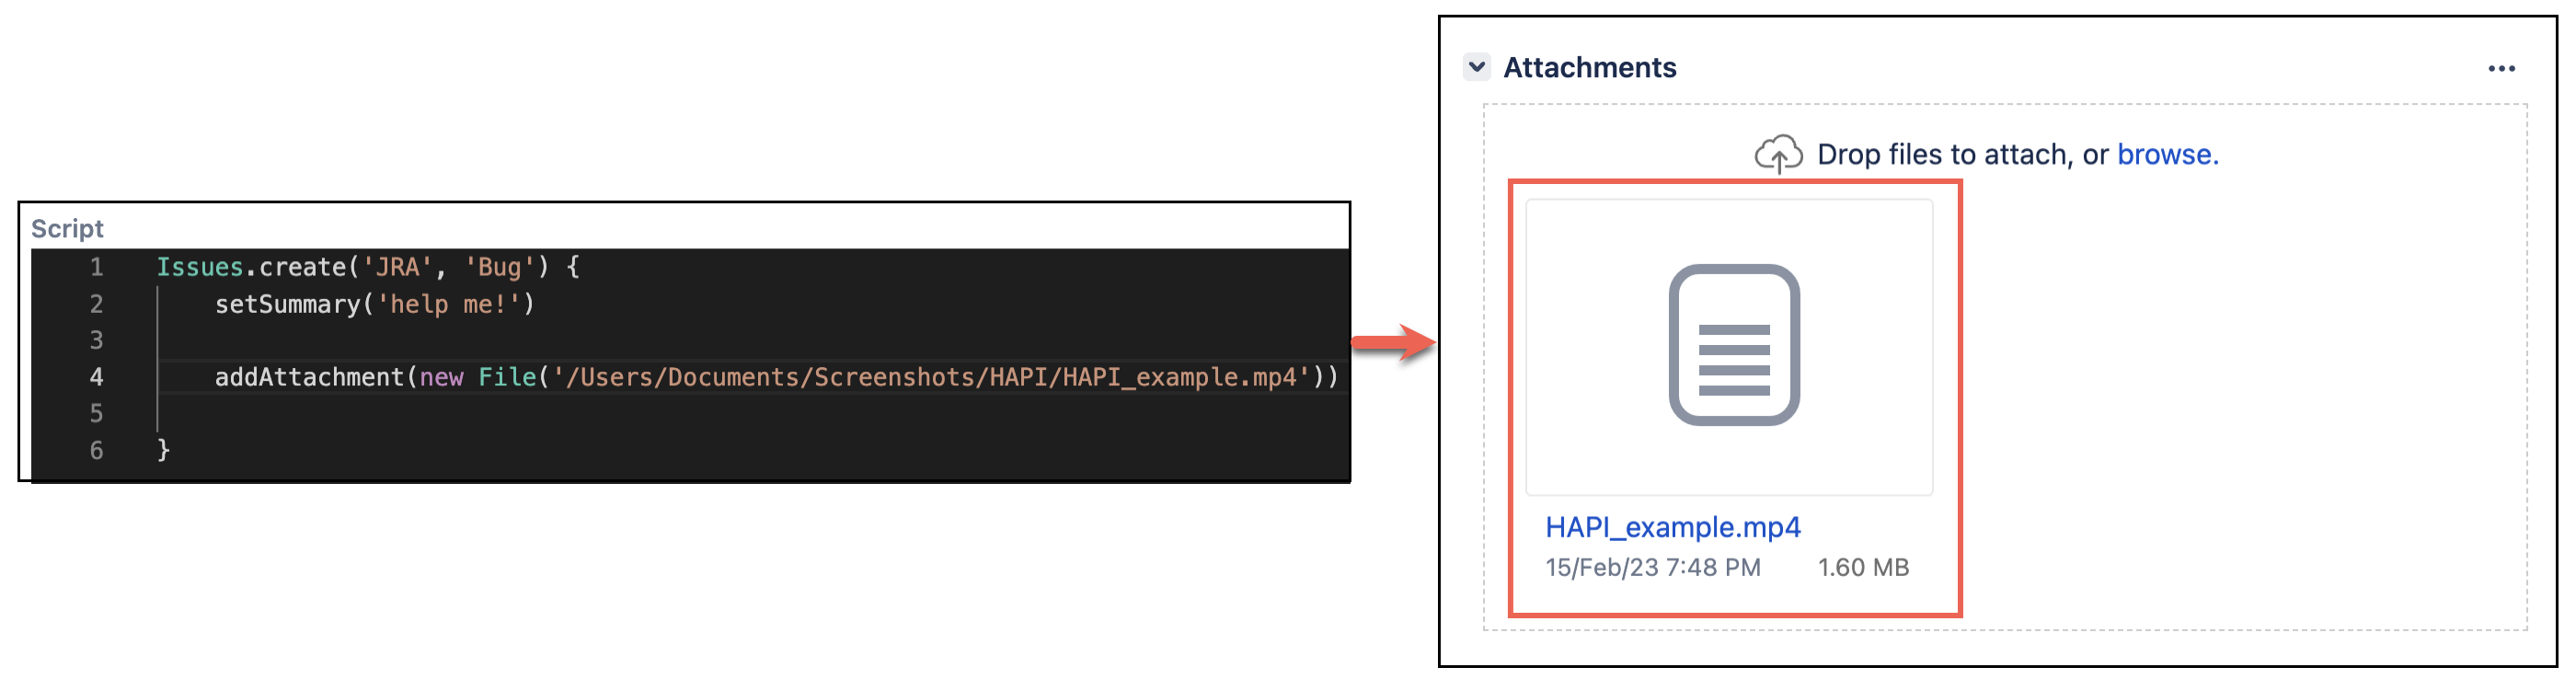 Image showing how you add an attachment with HAPI